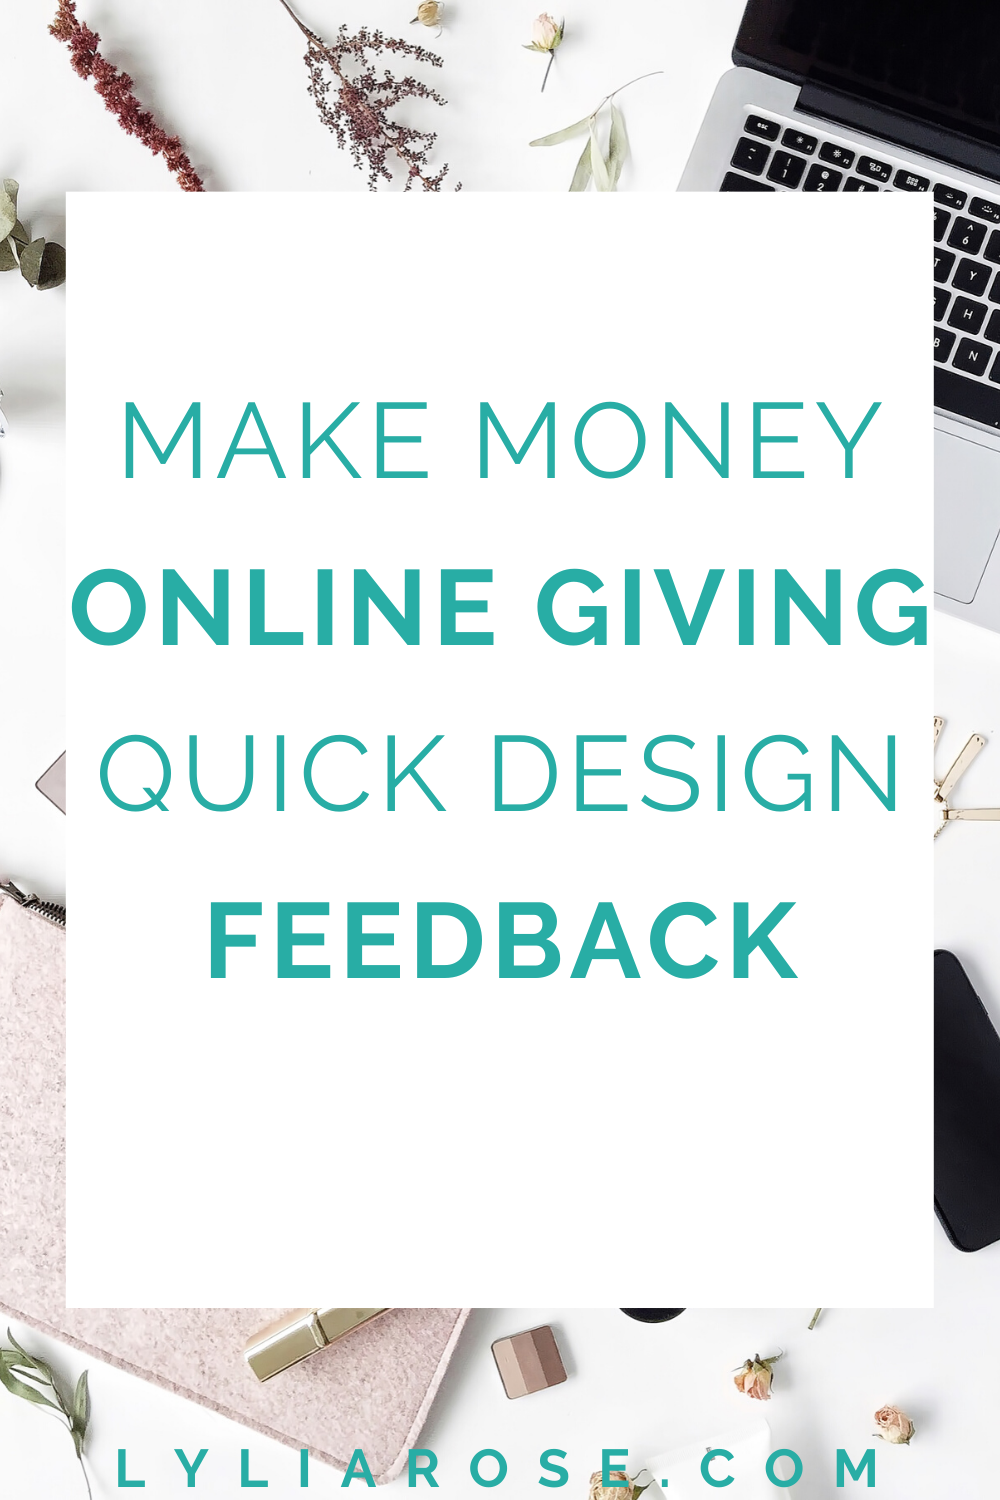 Usercrowd review_ Make money online giving quick design feedback (1)